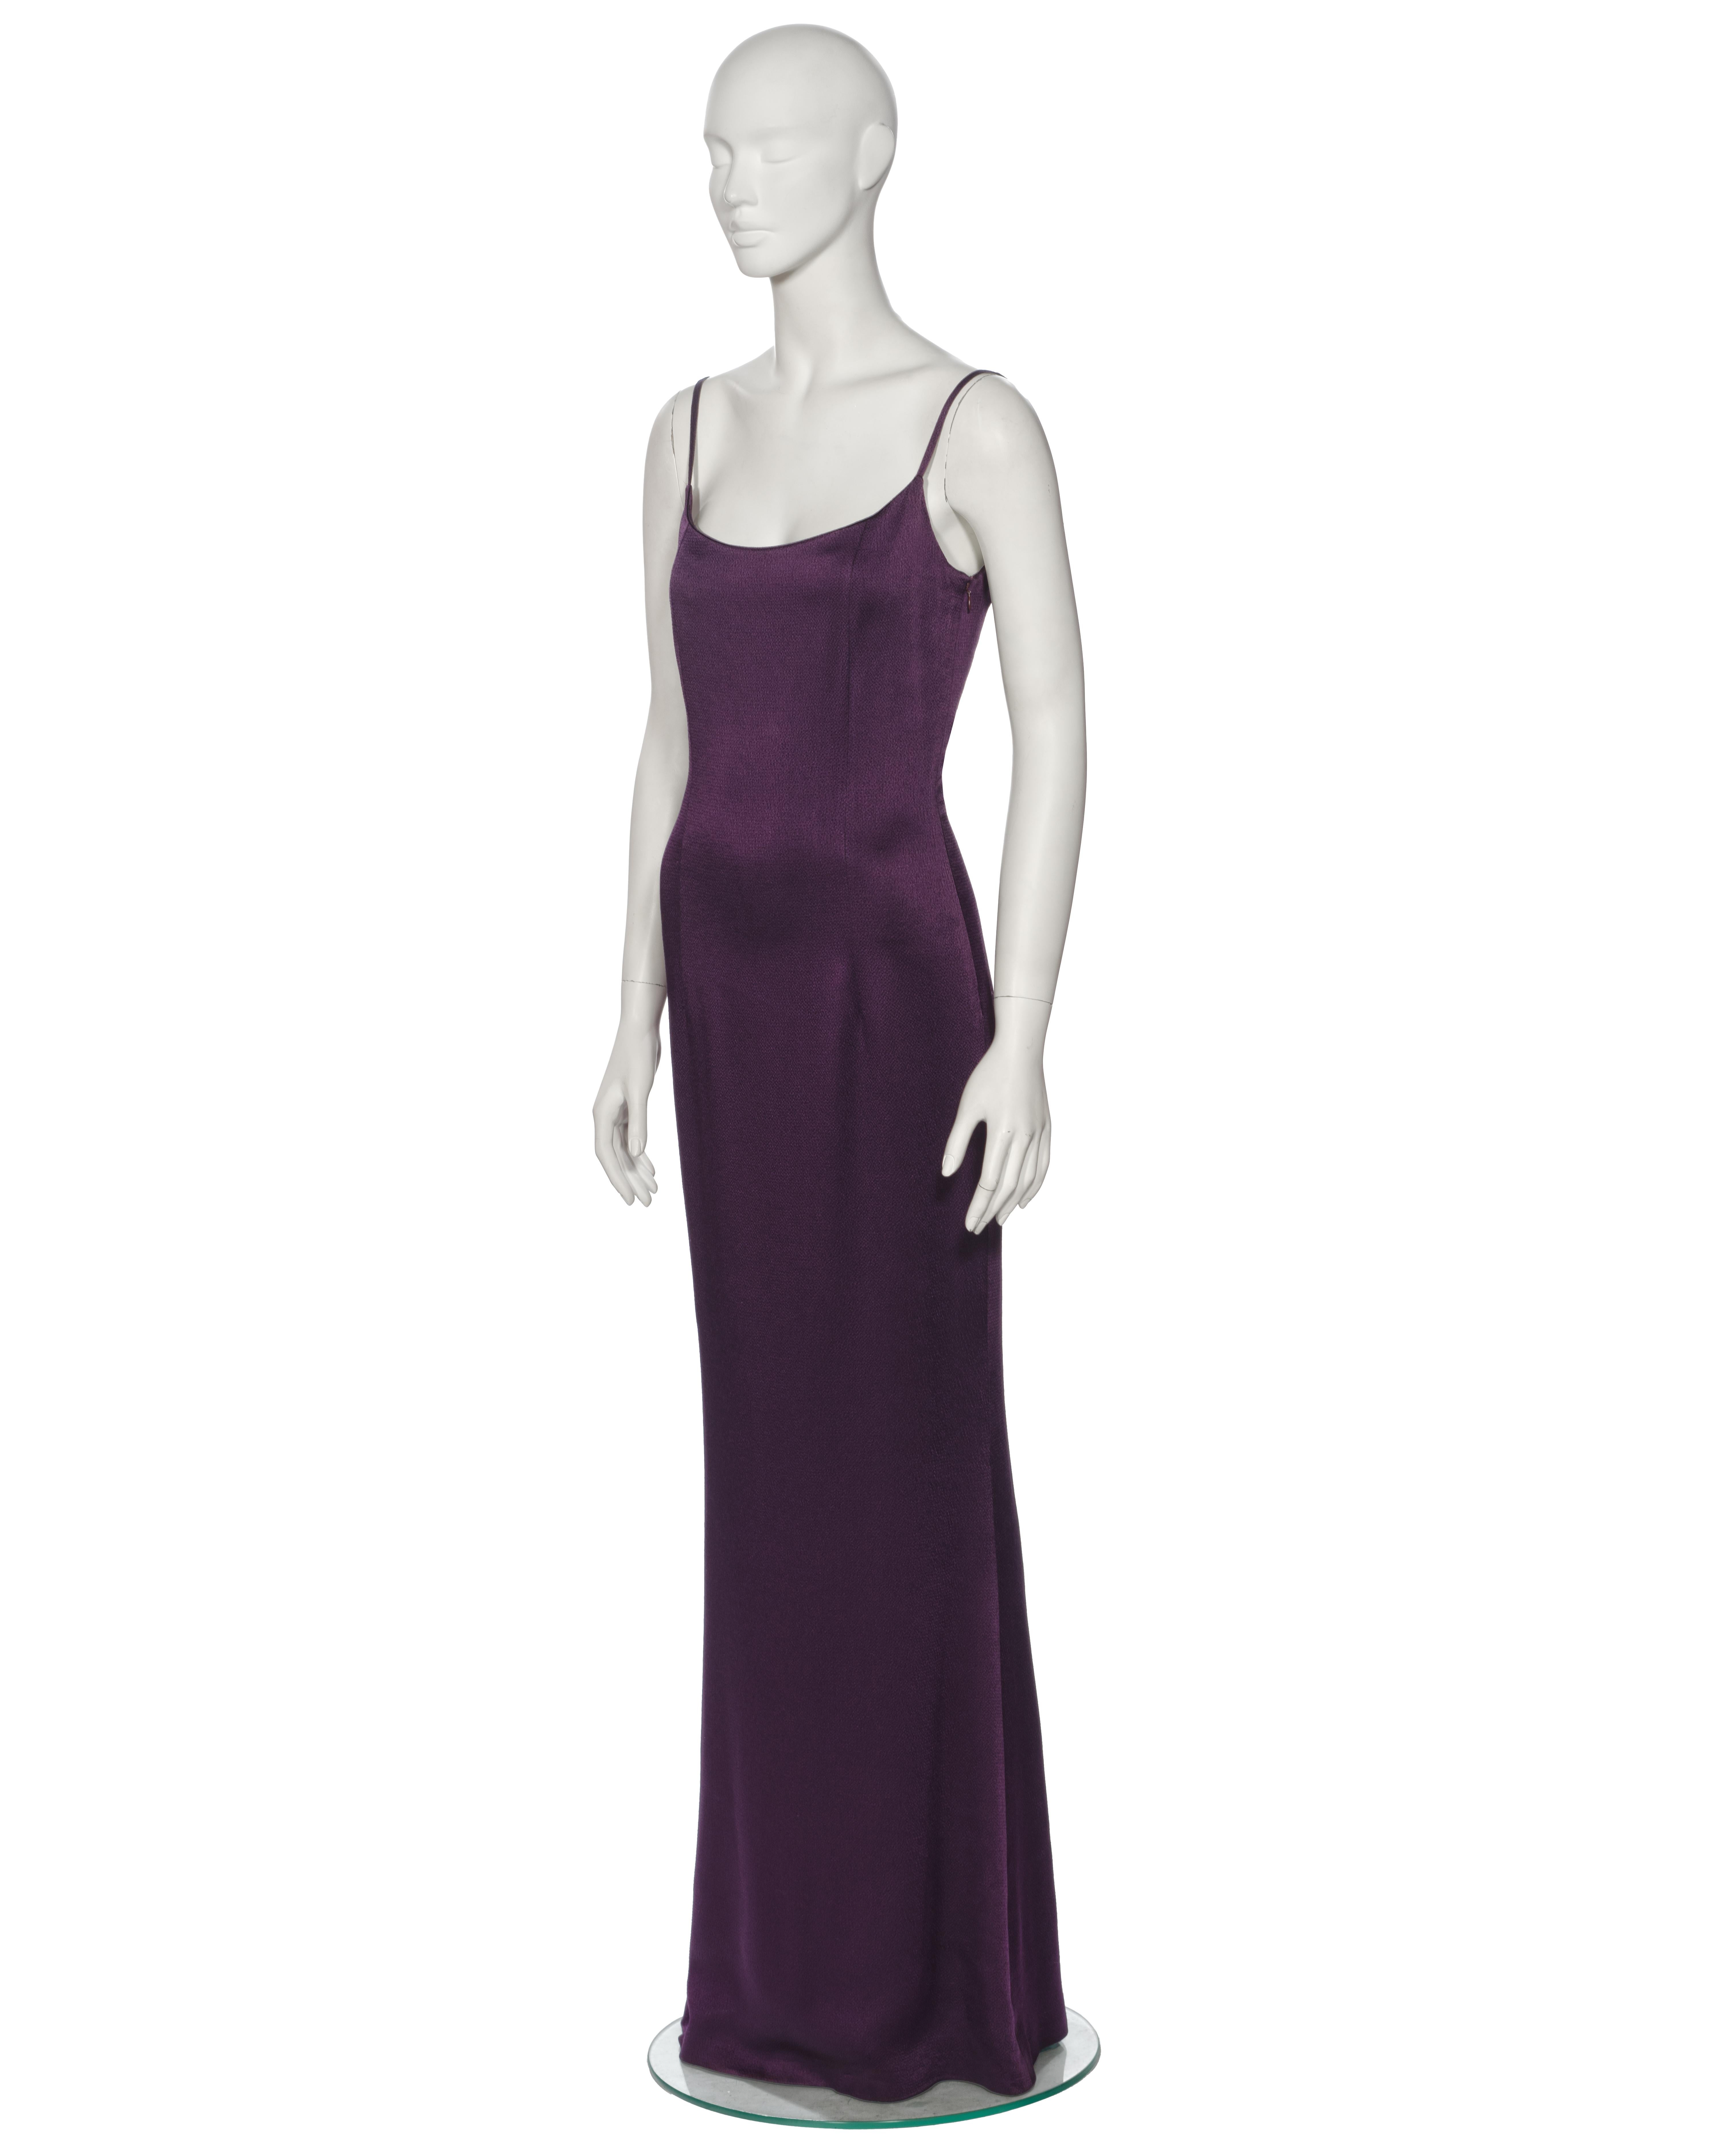 Christian Dior by John Galliano Purple Satin Evening Dress and Shawl, ss 1998 For Sale 3